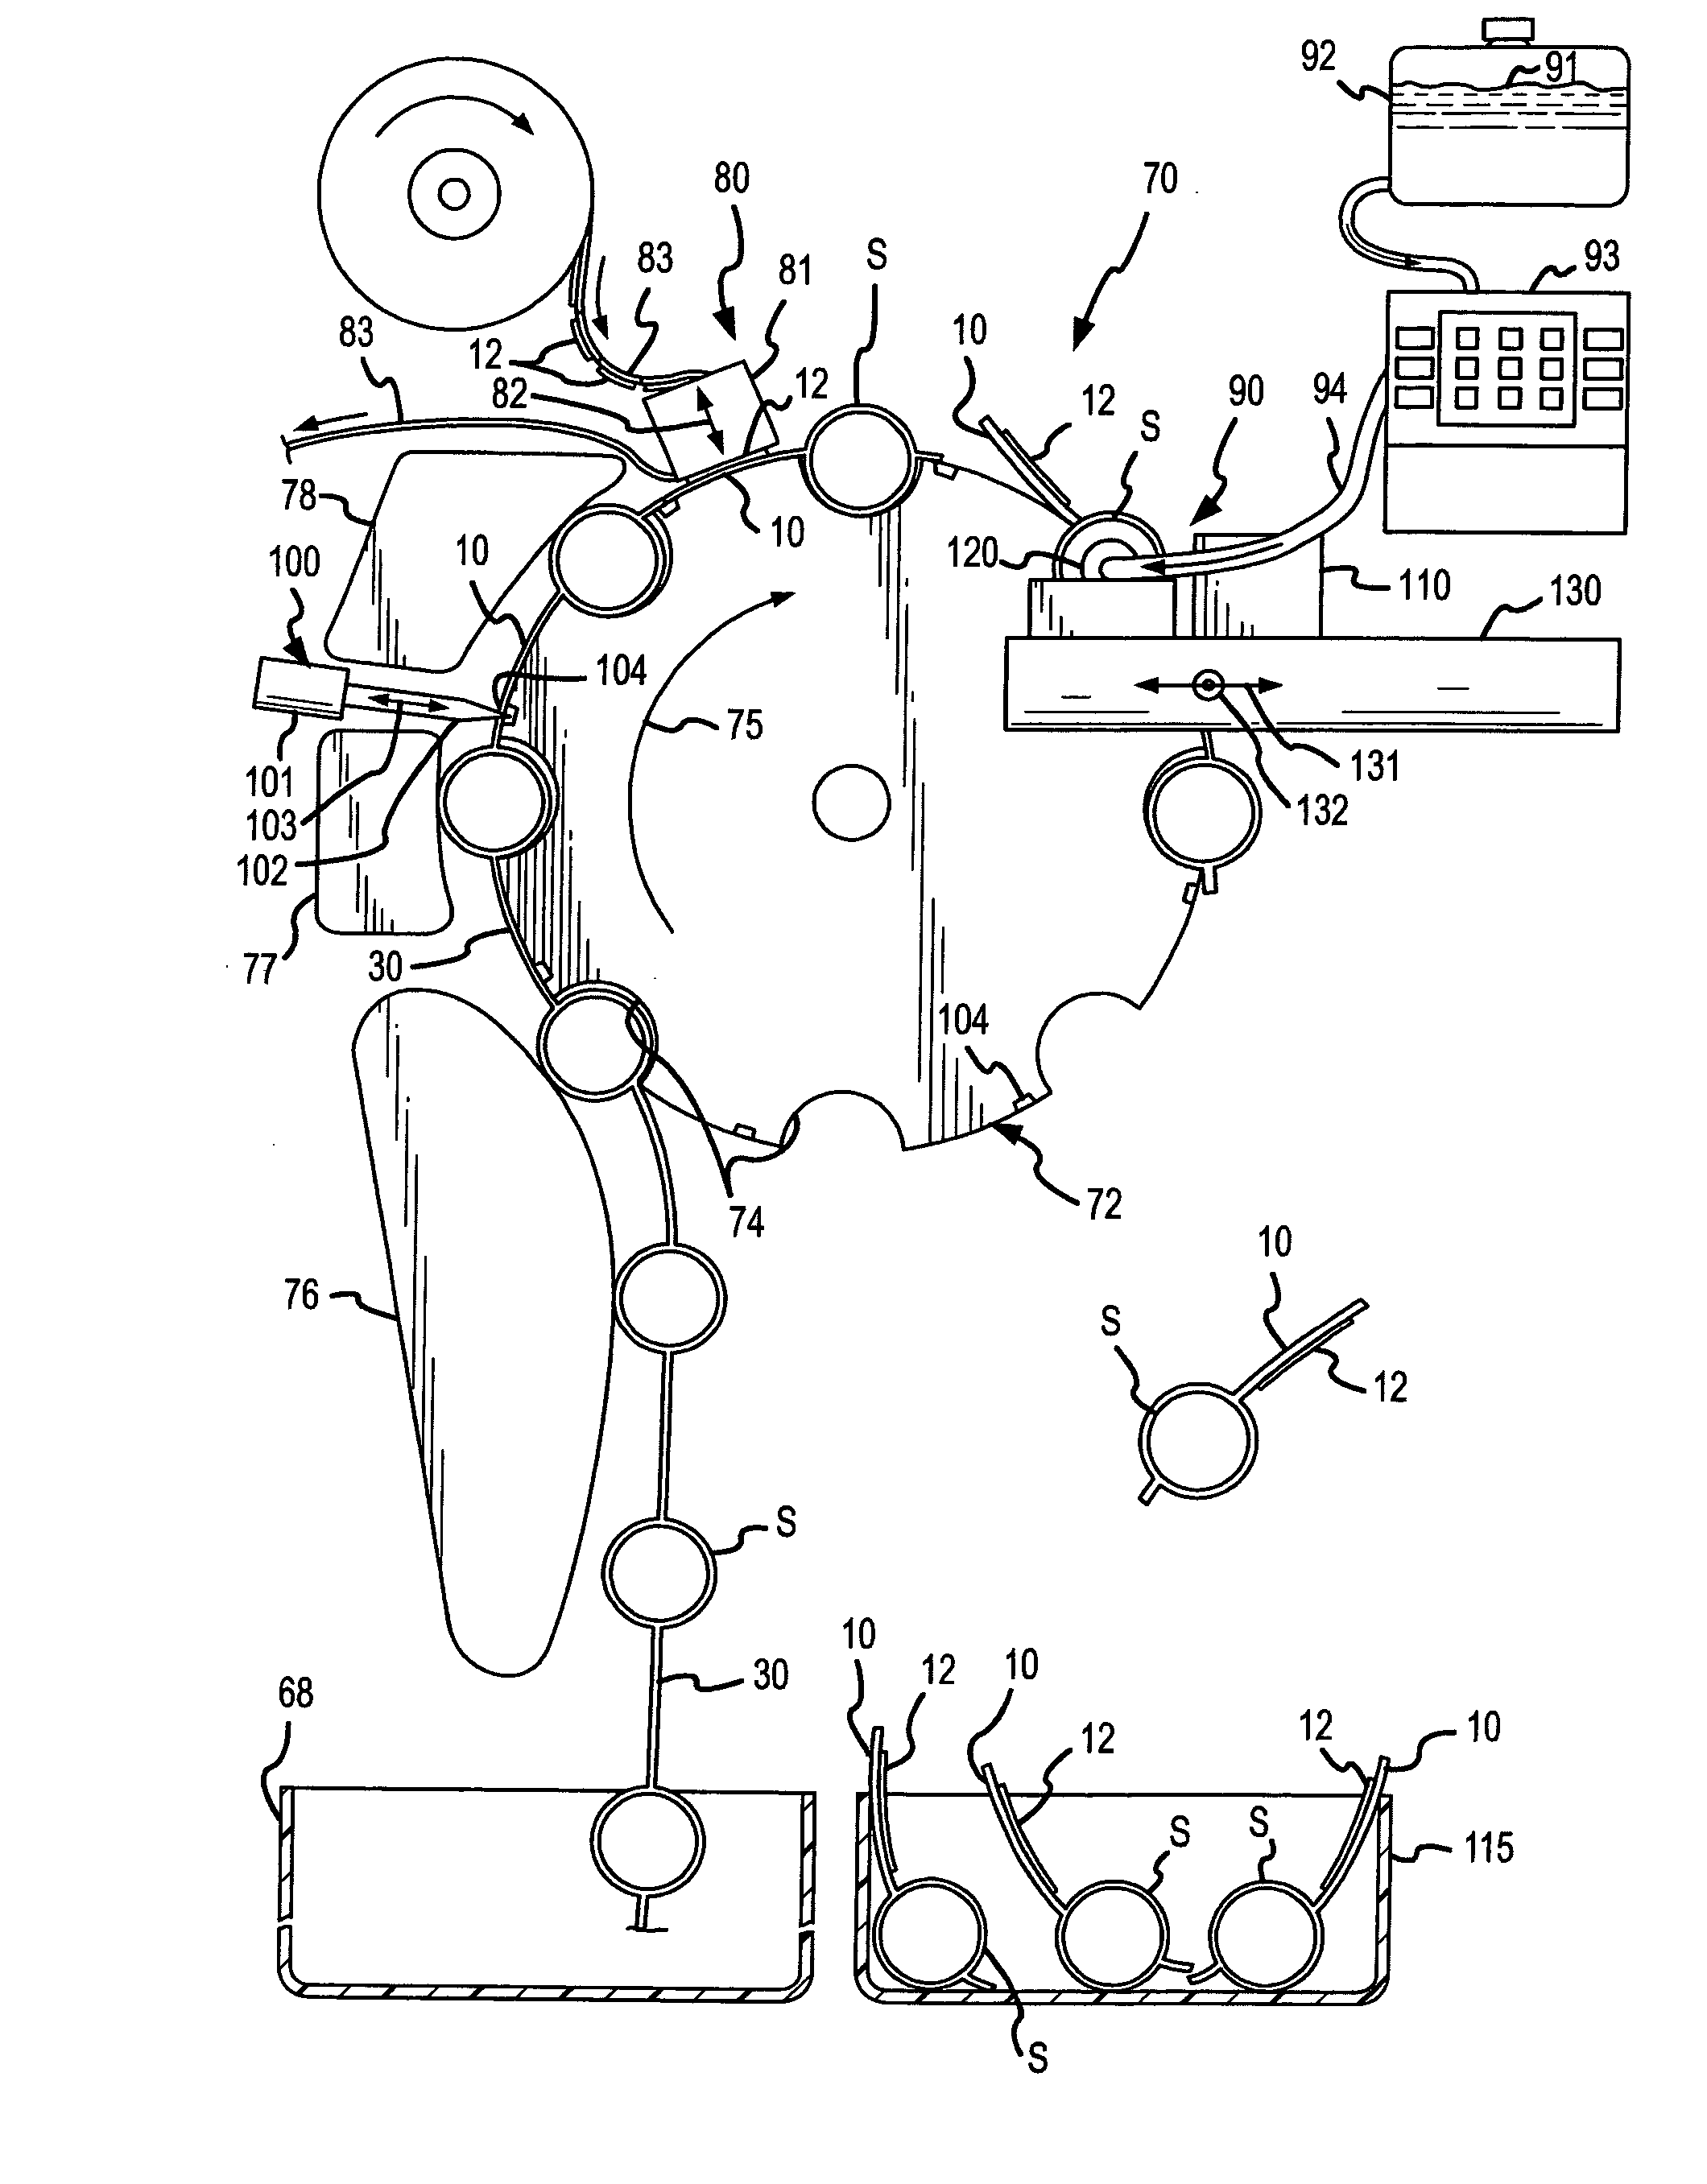 Method, system, and apparatus for handling, labeling, filling and capping syringes